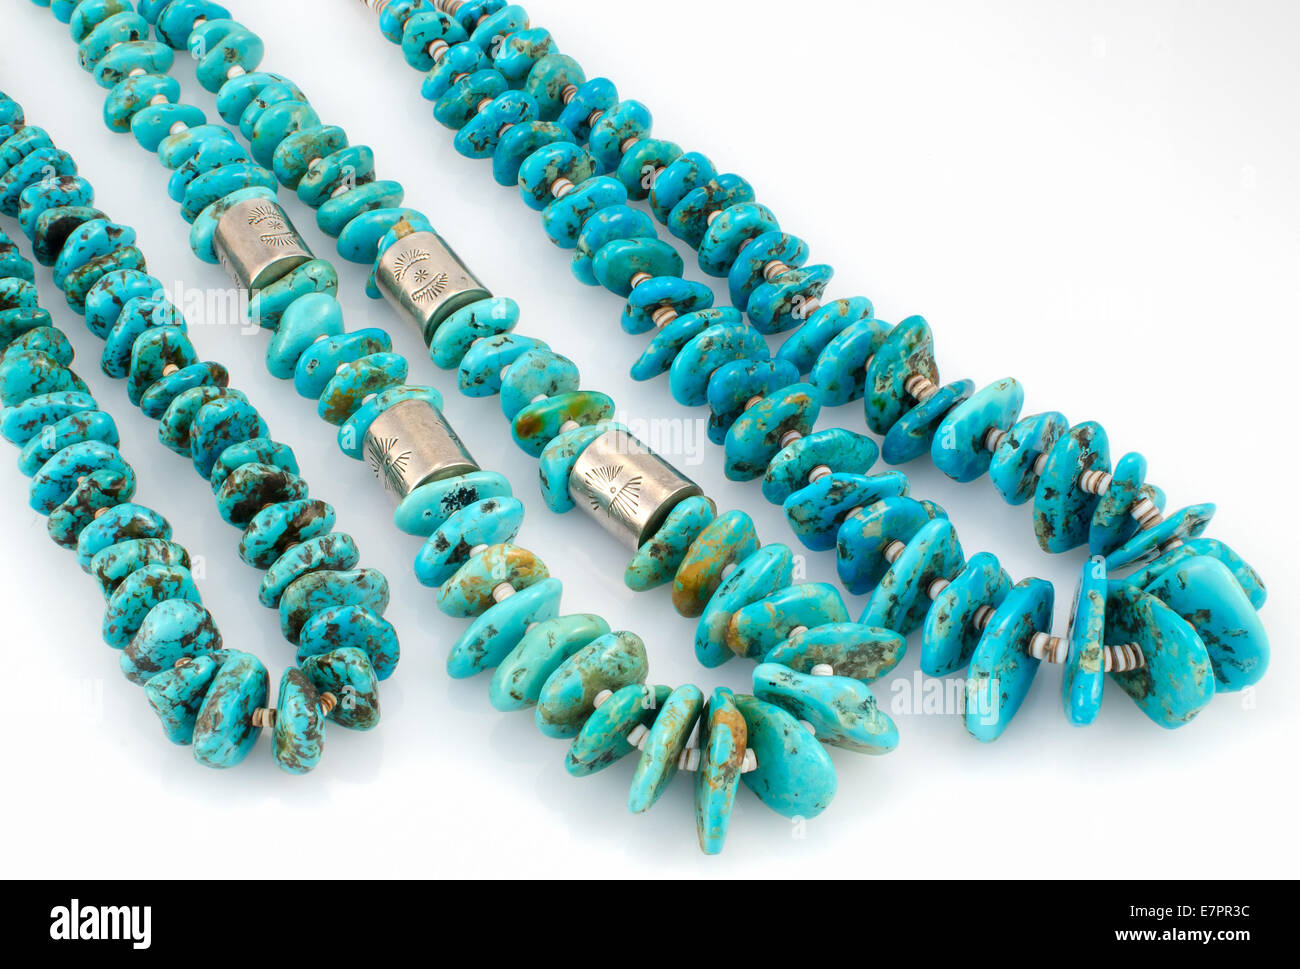 Navajo Turquoise Nugget Necklaces with Silver Beads. Stock Photo